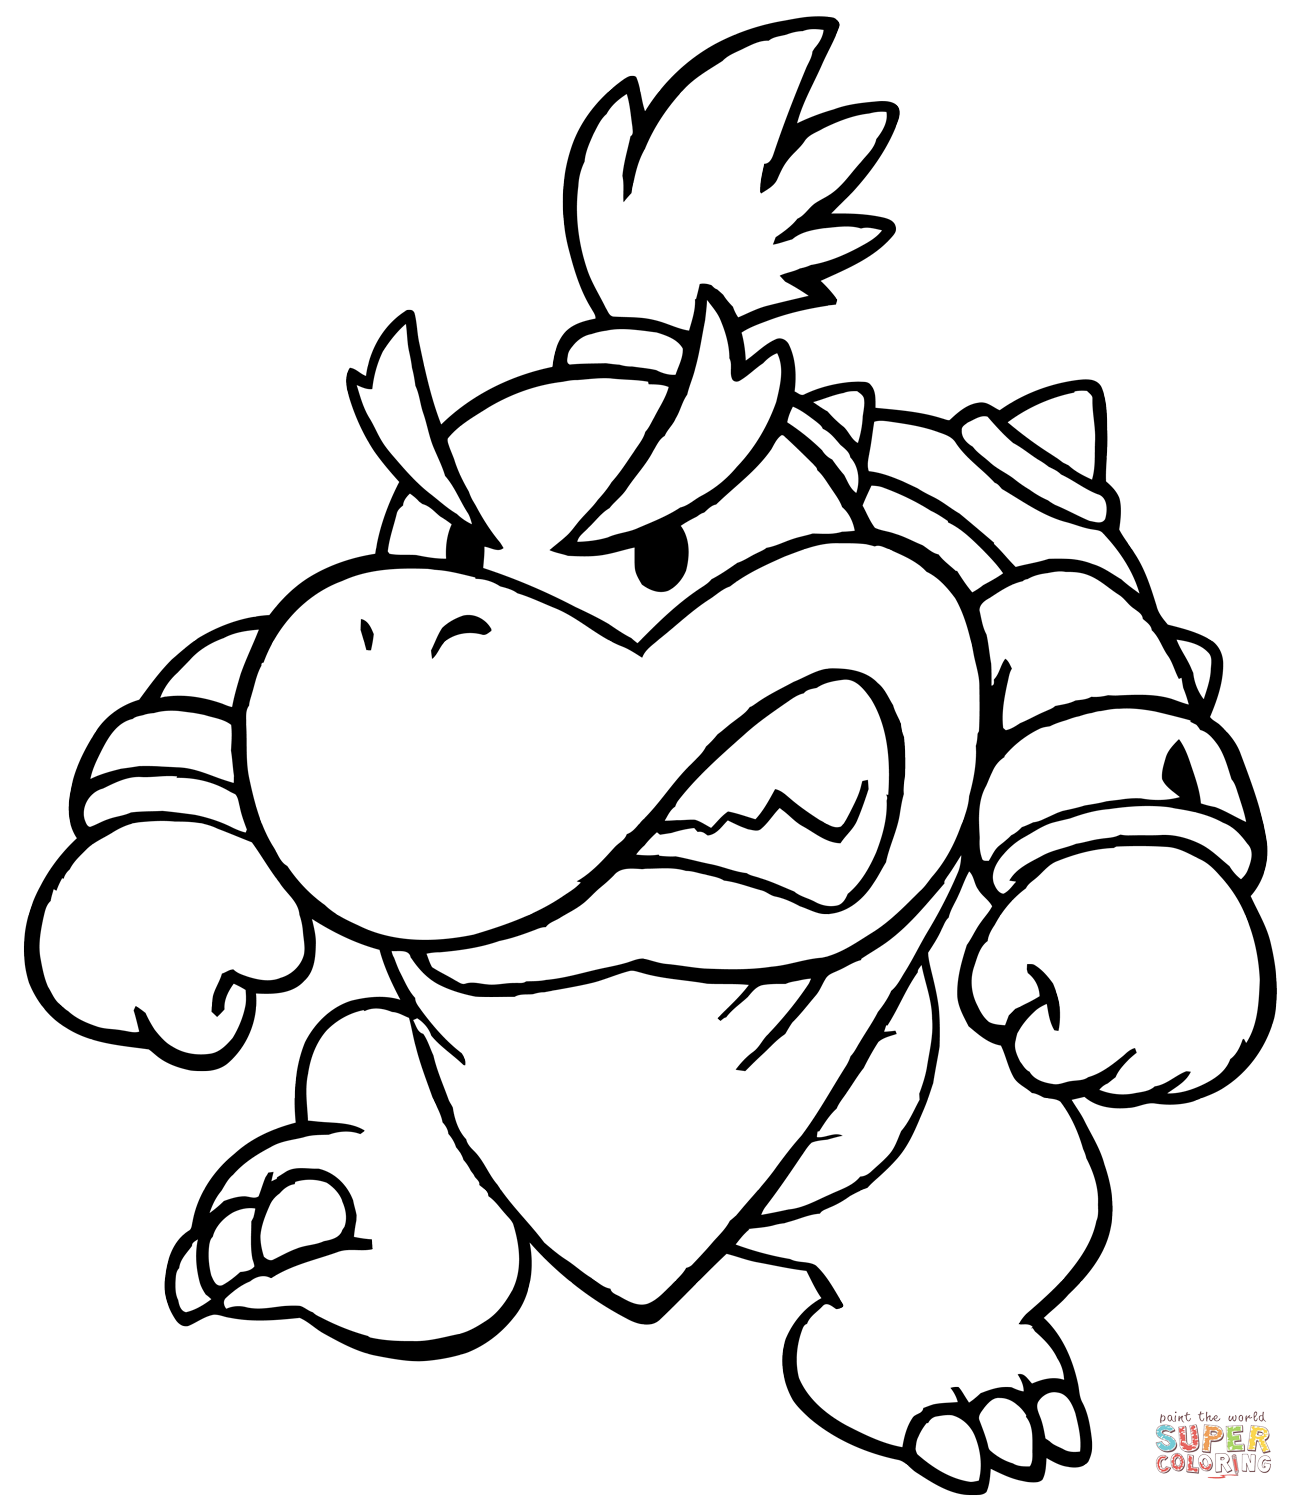 Baby Bowser coloring page | Free Printable Coloring Pages